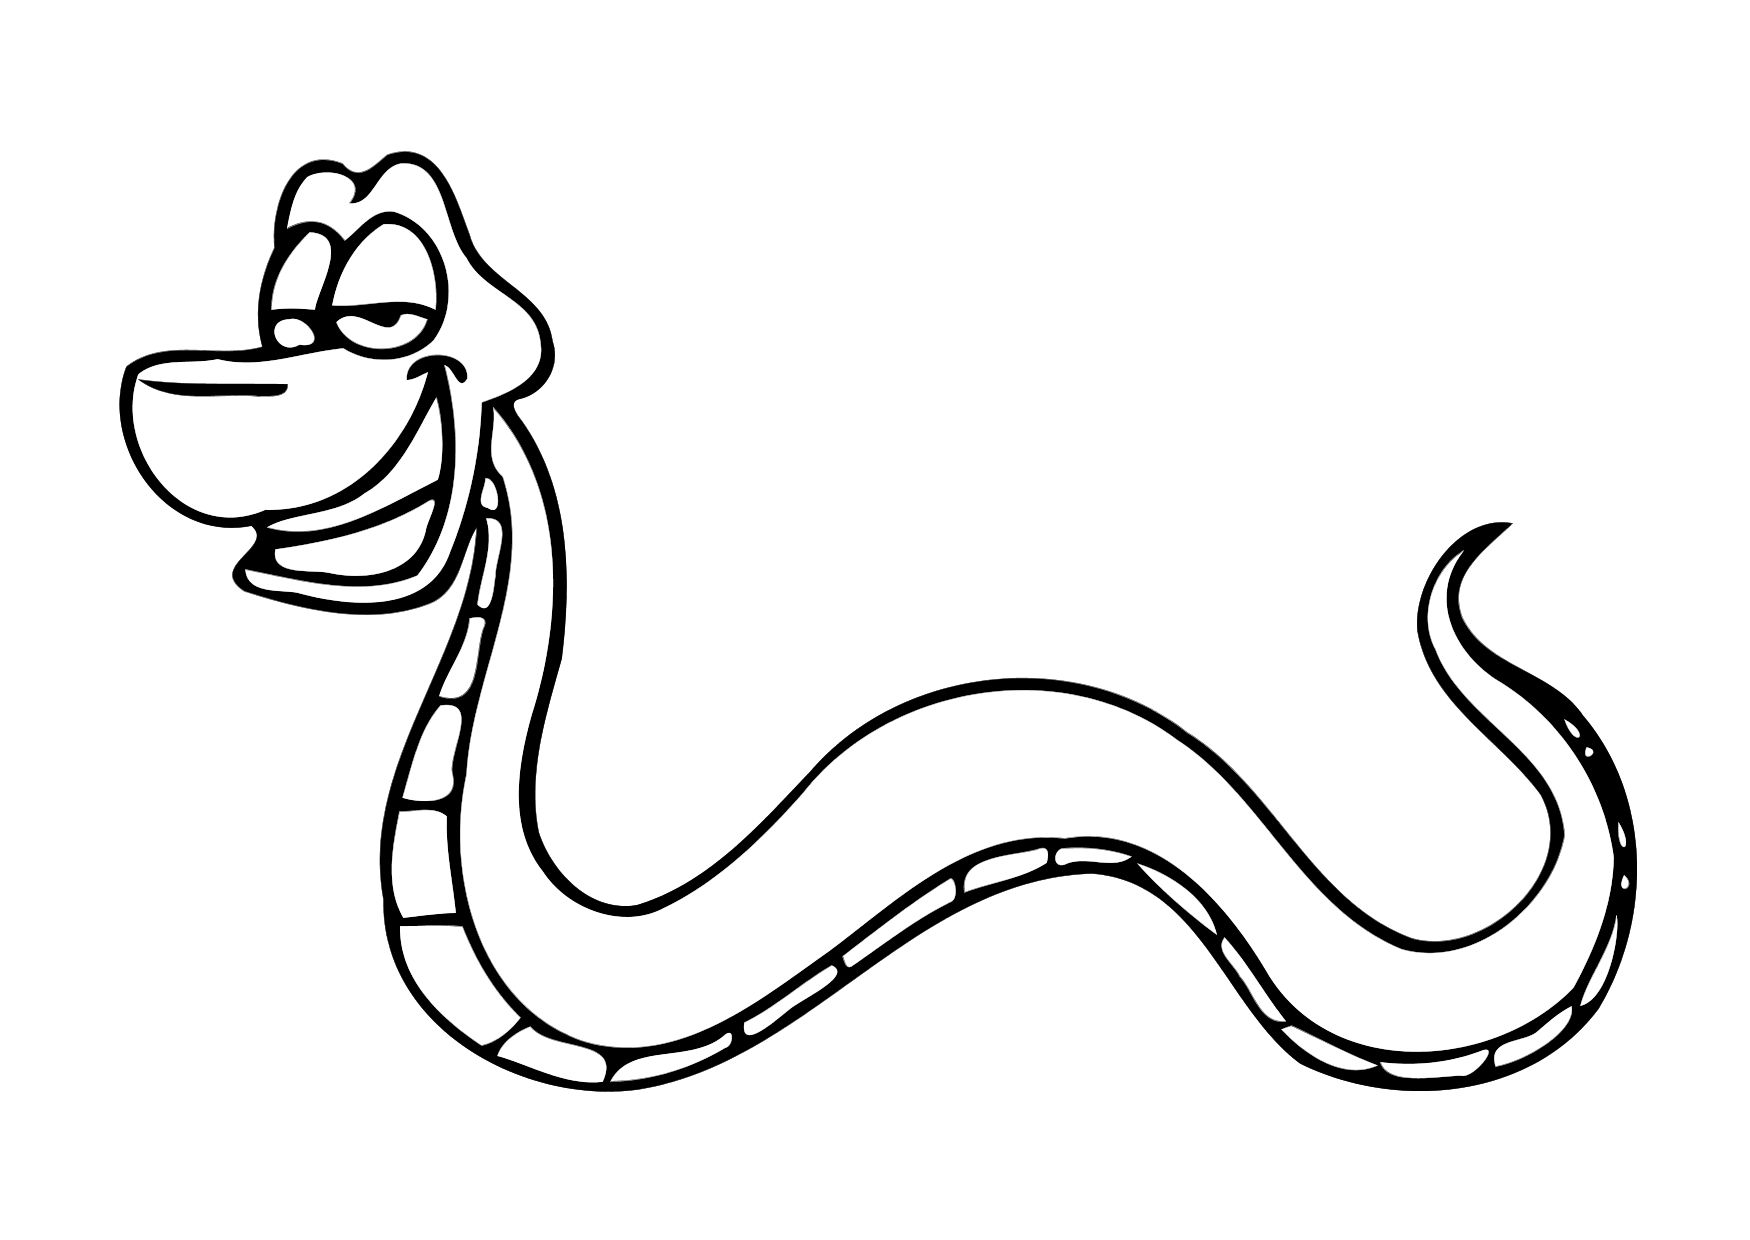 Snake Drawing - ClipArt Best